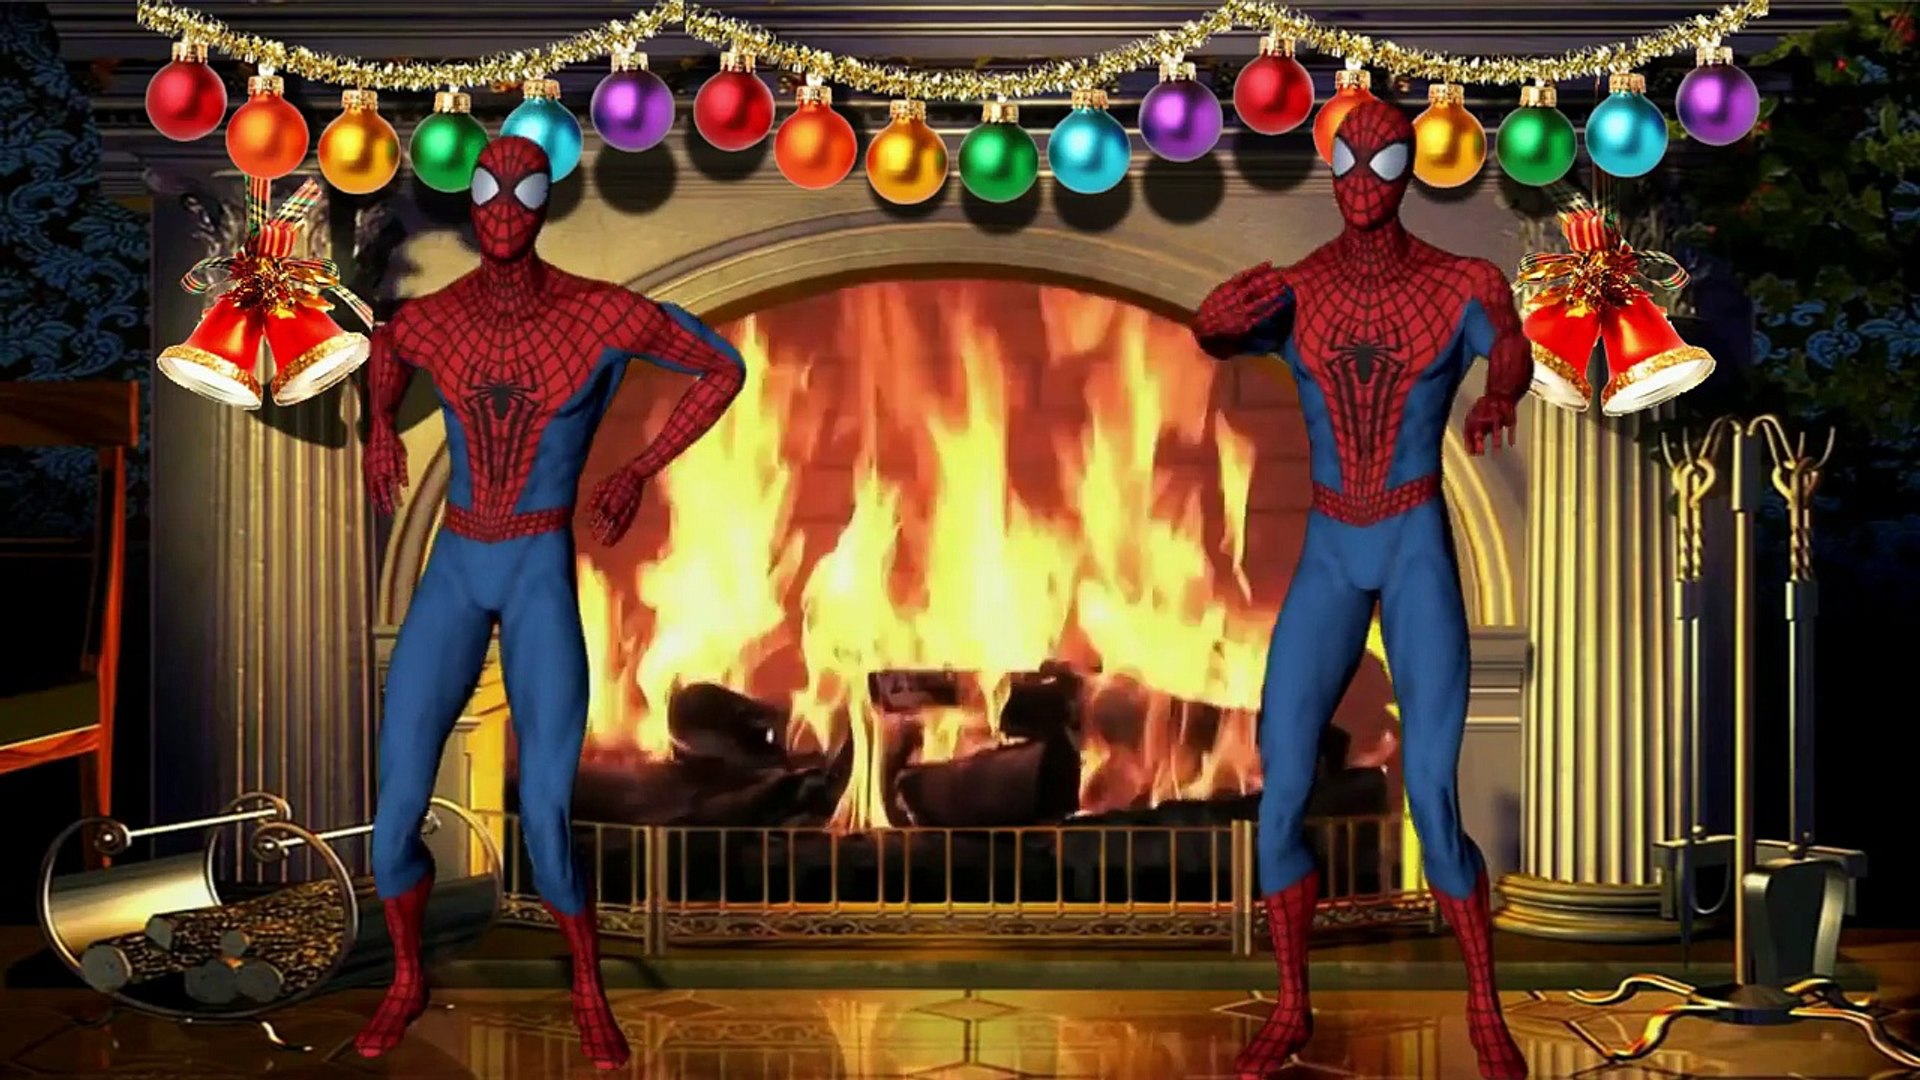 SPIDERMAN CHRISTMAS MUSIC and SUPERHERO DANCE PARTY with Happy holidays Music and Videos 2